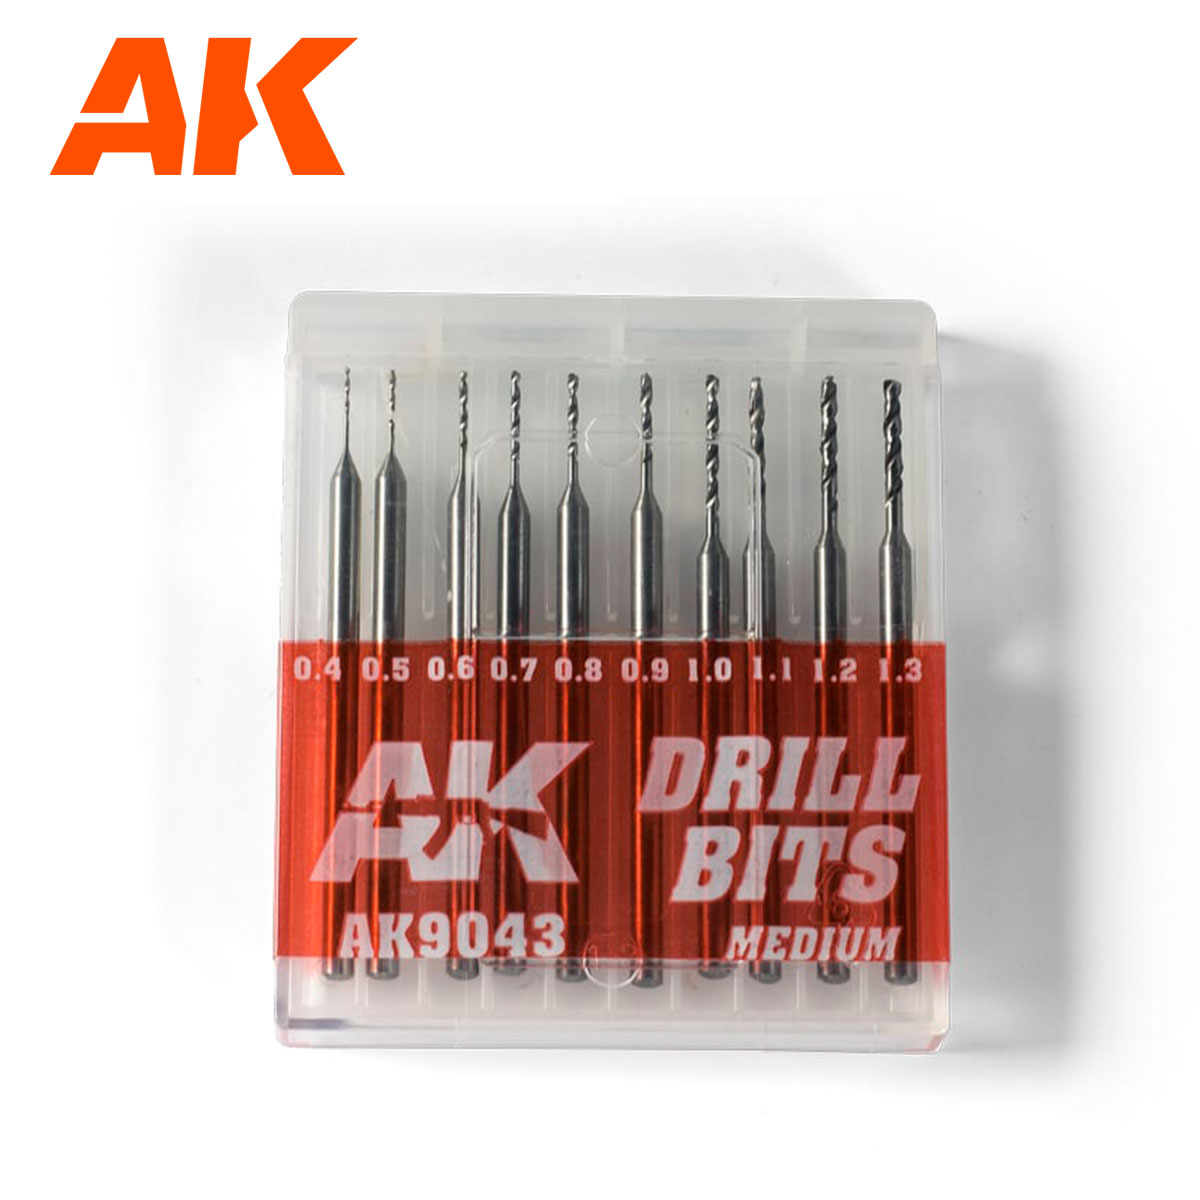 what size is a k drill bit? 2